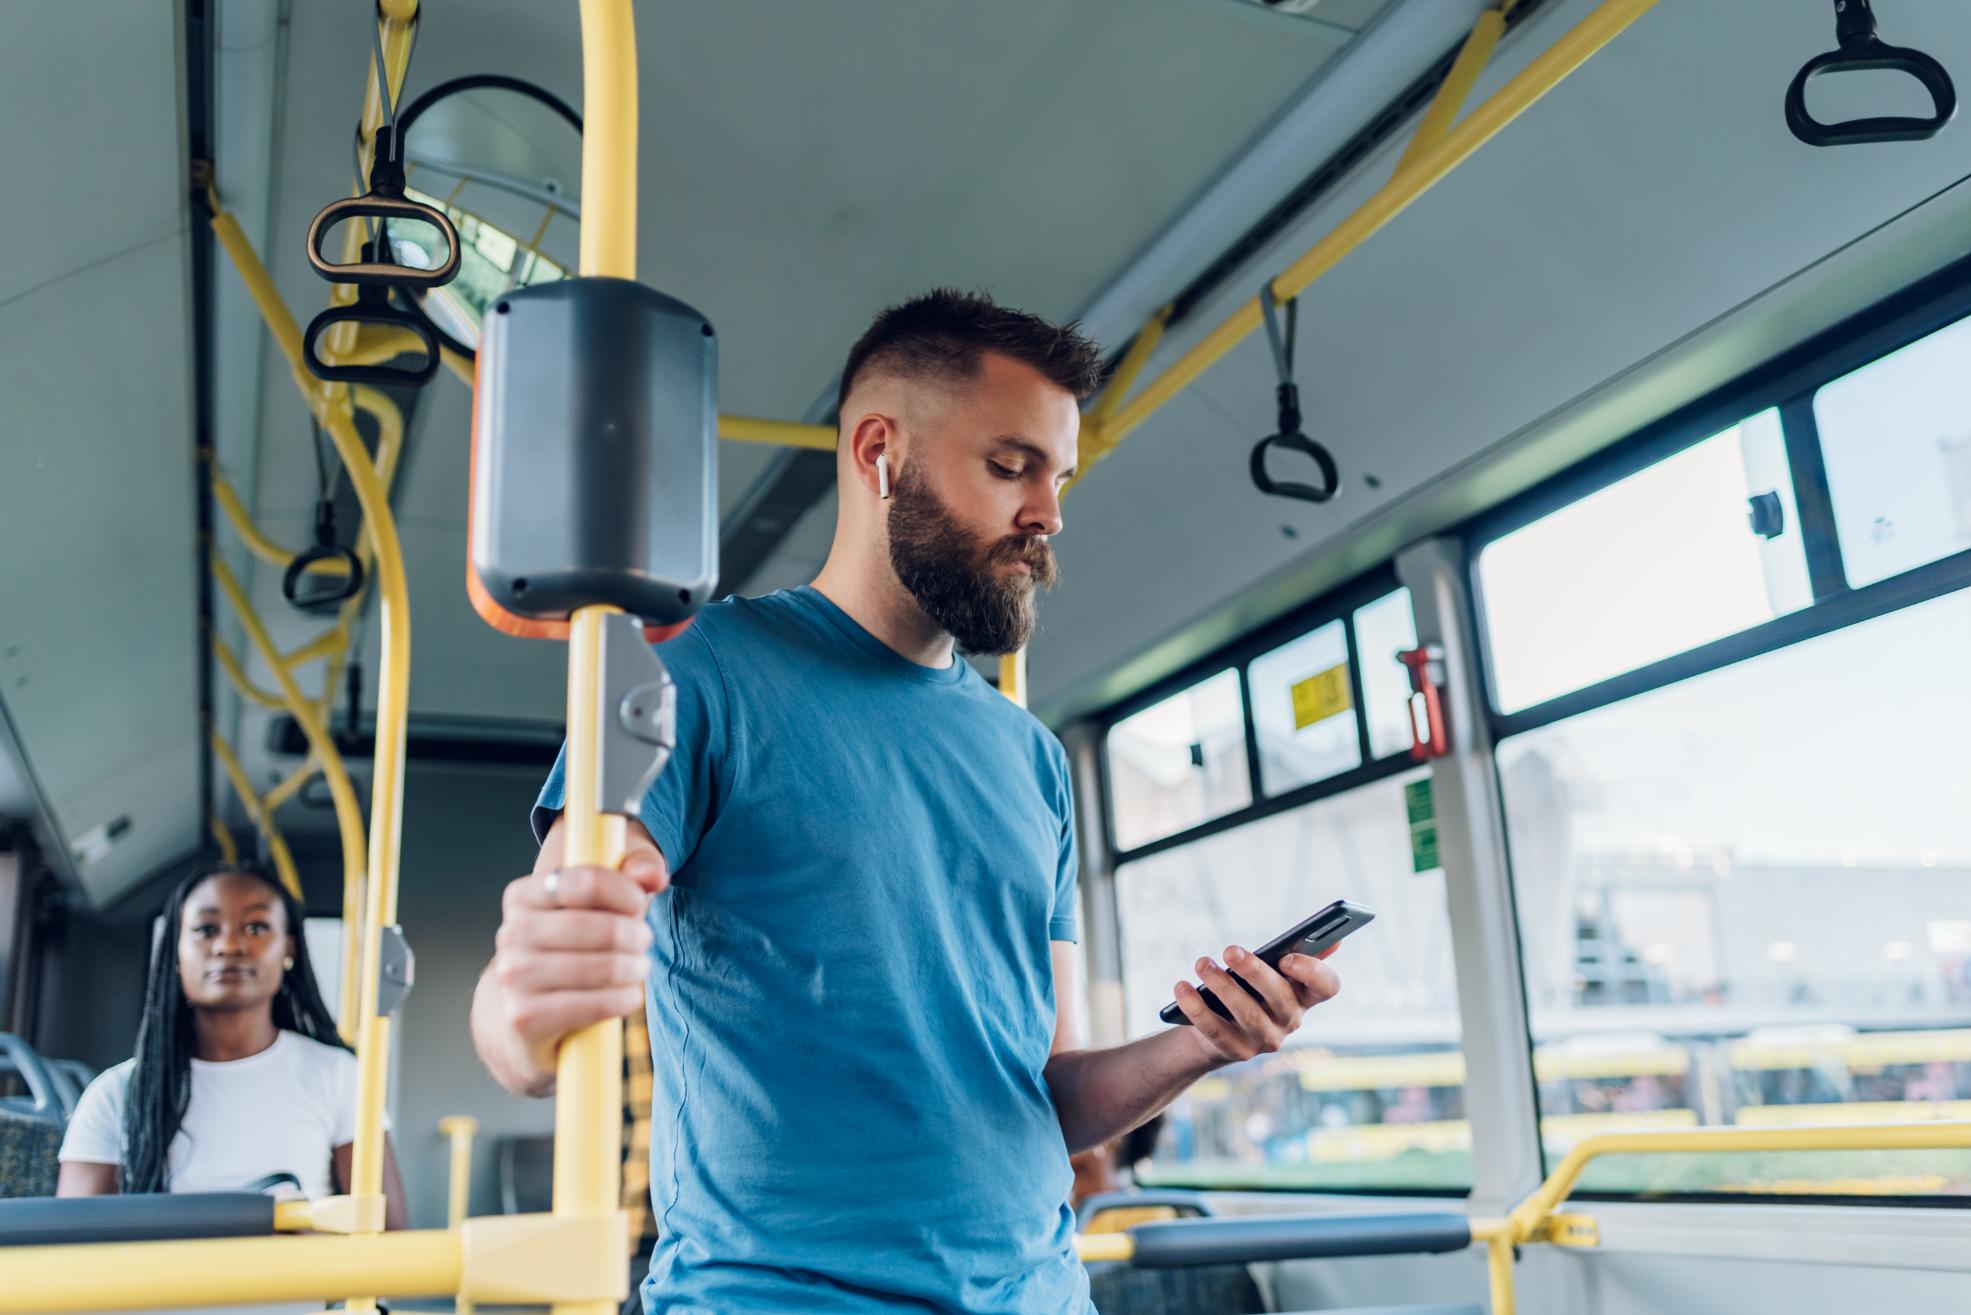 man-using-smartpone-while-riding-in-a-bus